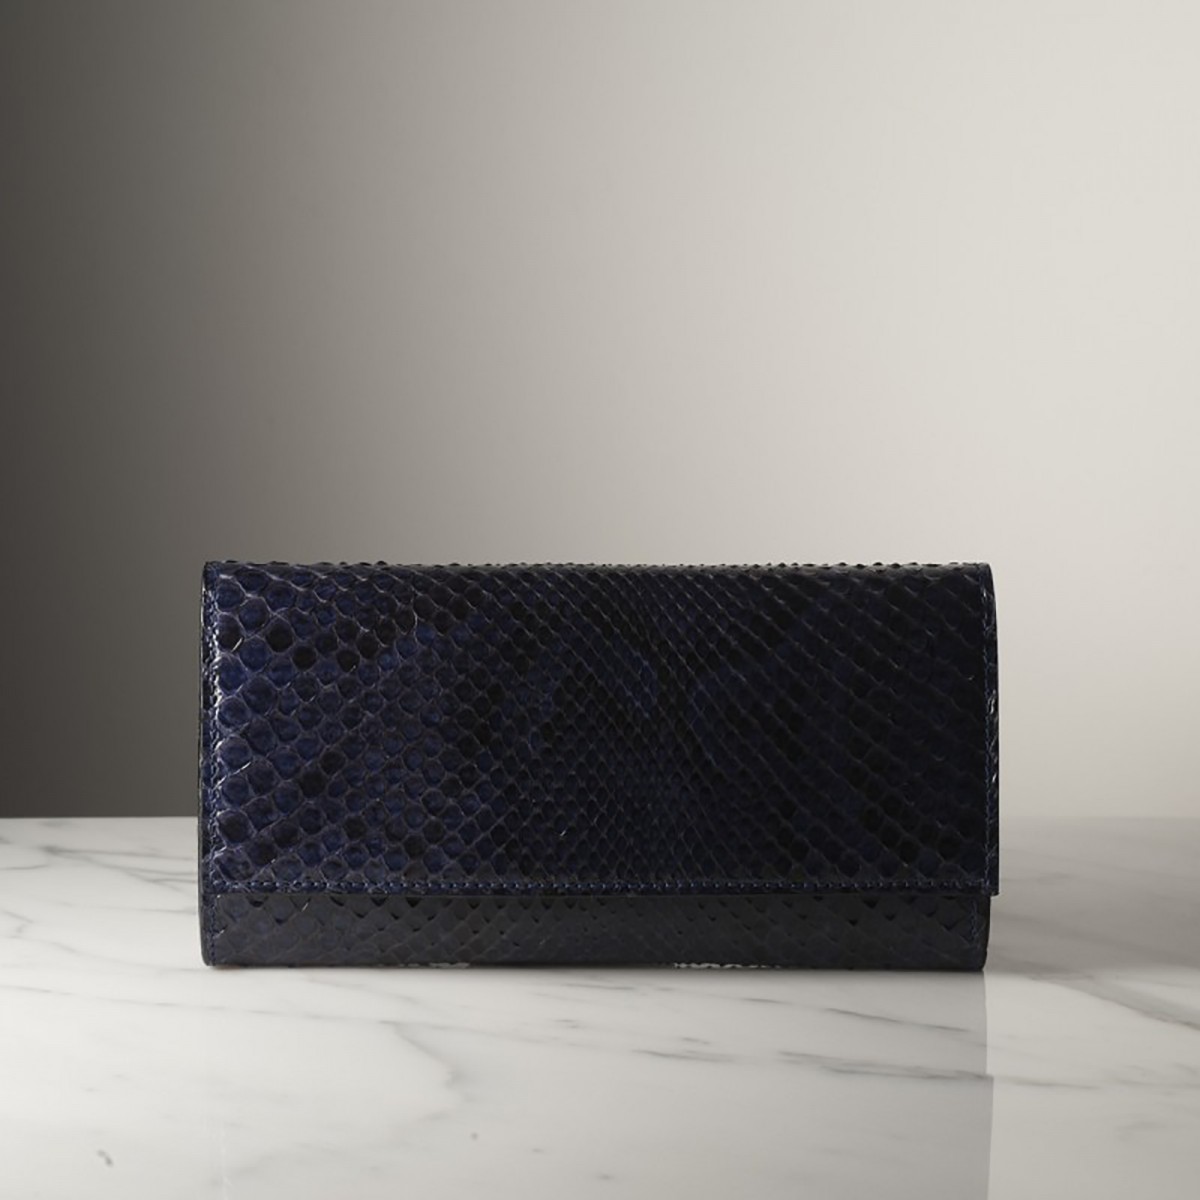 SUZANNE PYTHON - Python leather wallet, handmade in Italy